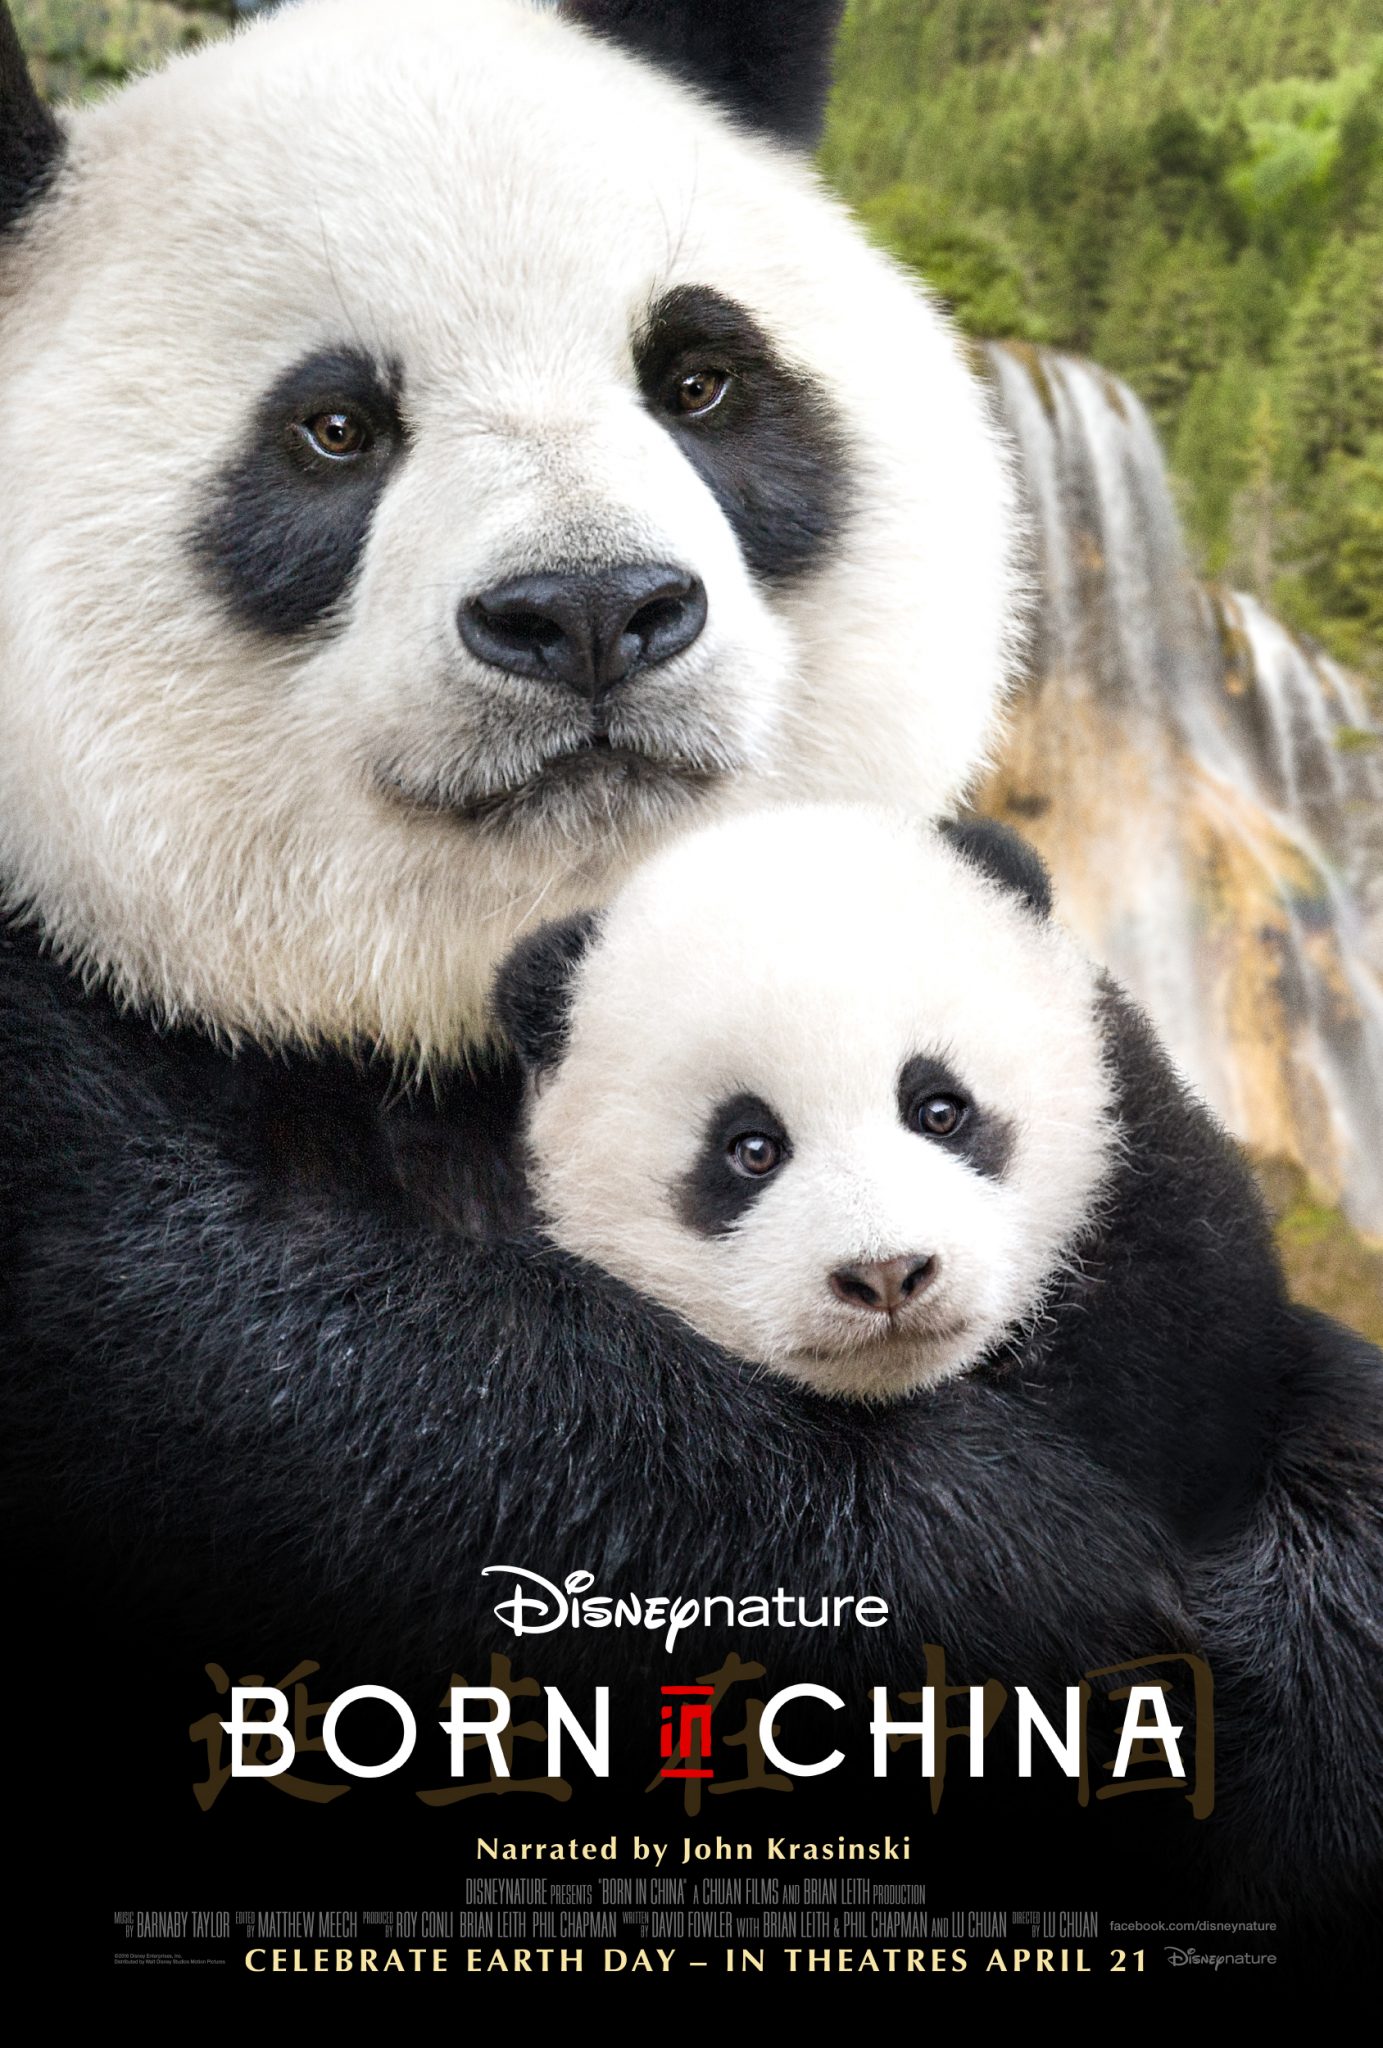 My Review: Born In China